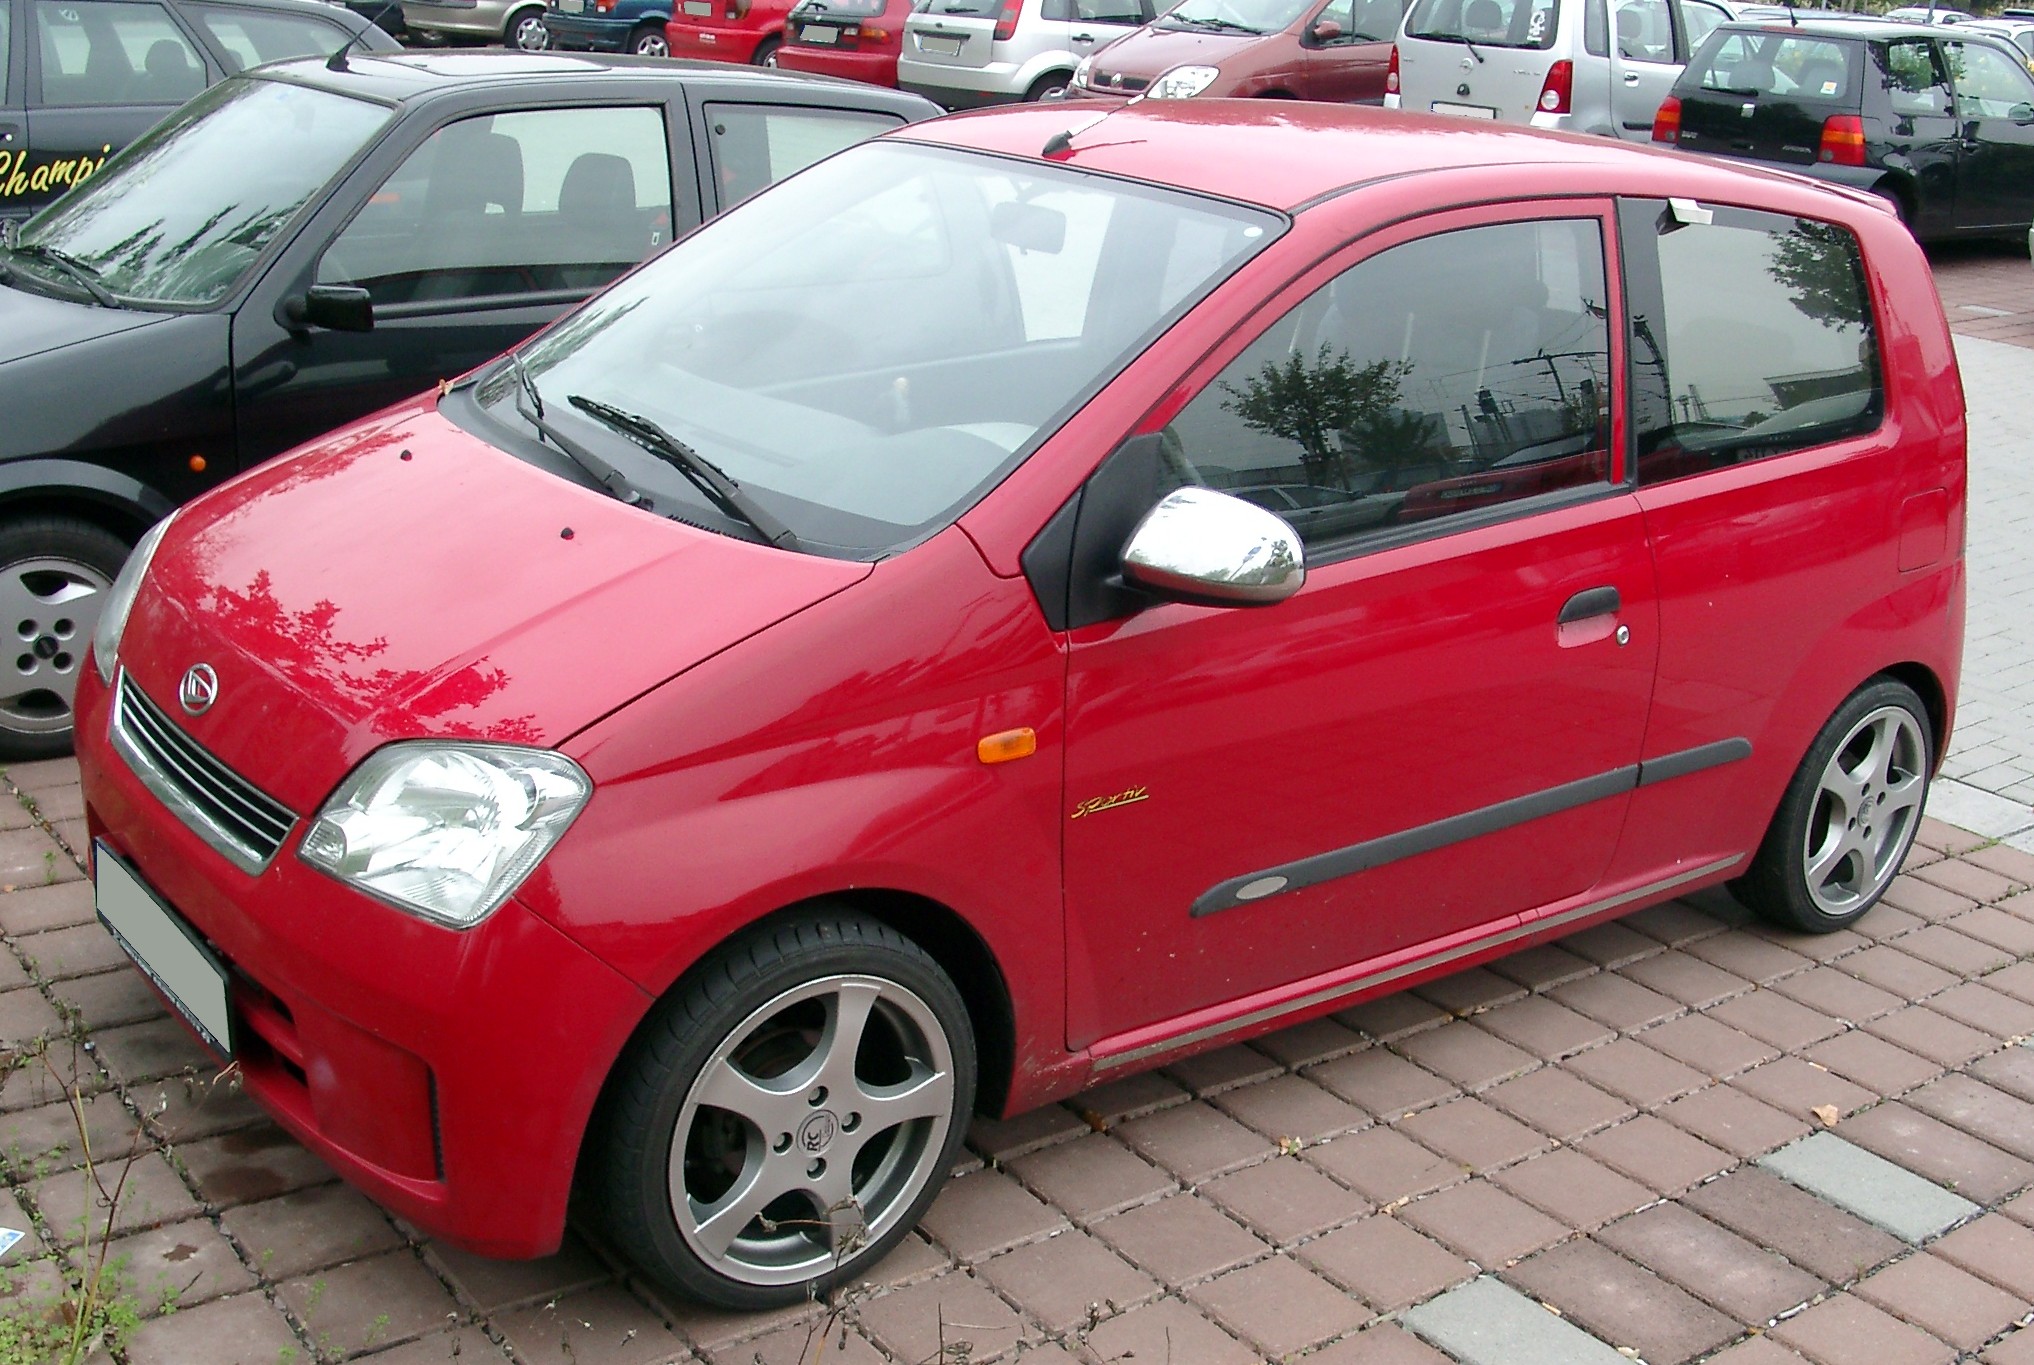 Daihatsu Cuore Pictures | HD Wallpapers Plus